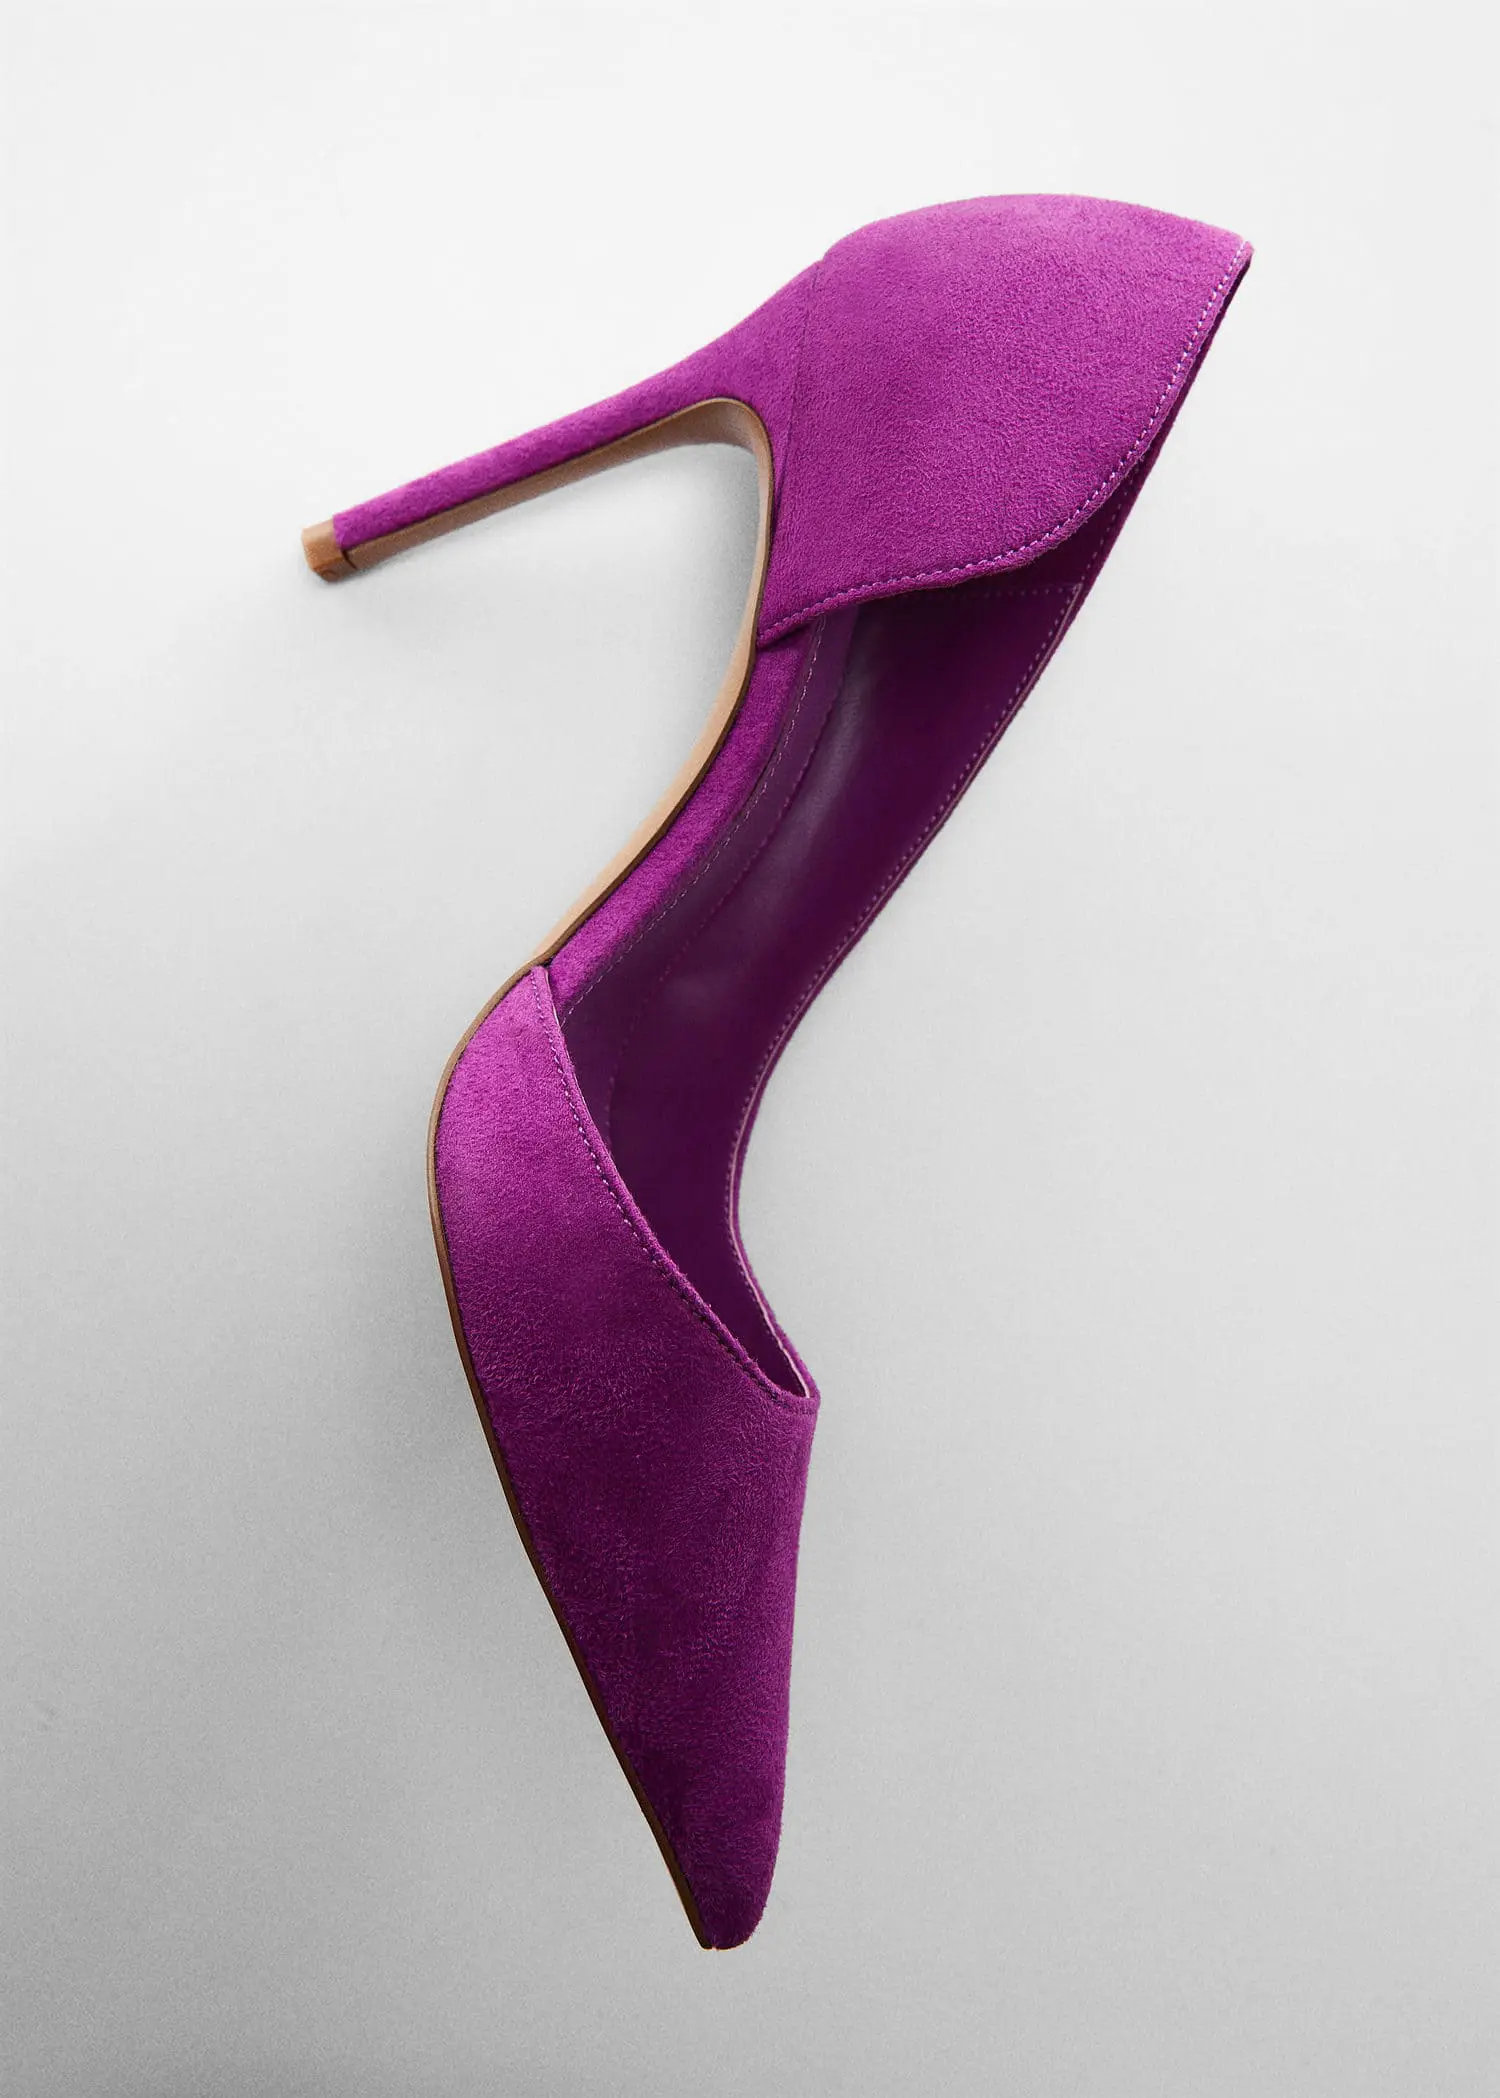 Mango Asymmetrical heeled shoes. a pair of purple high heels on a white surface. 